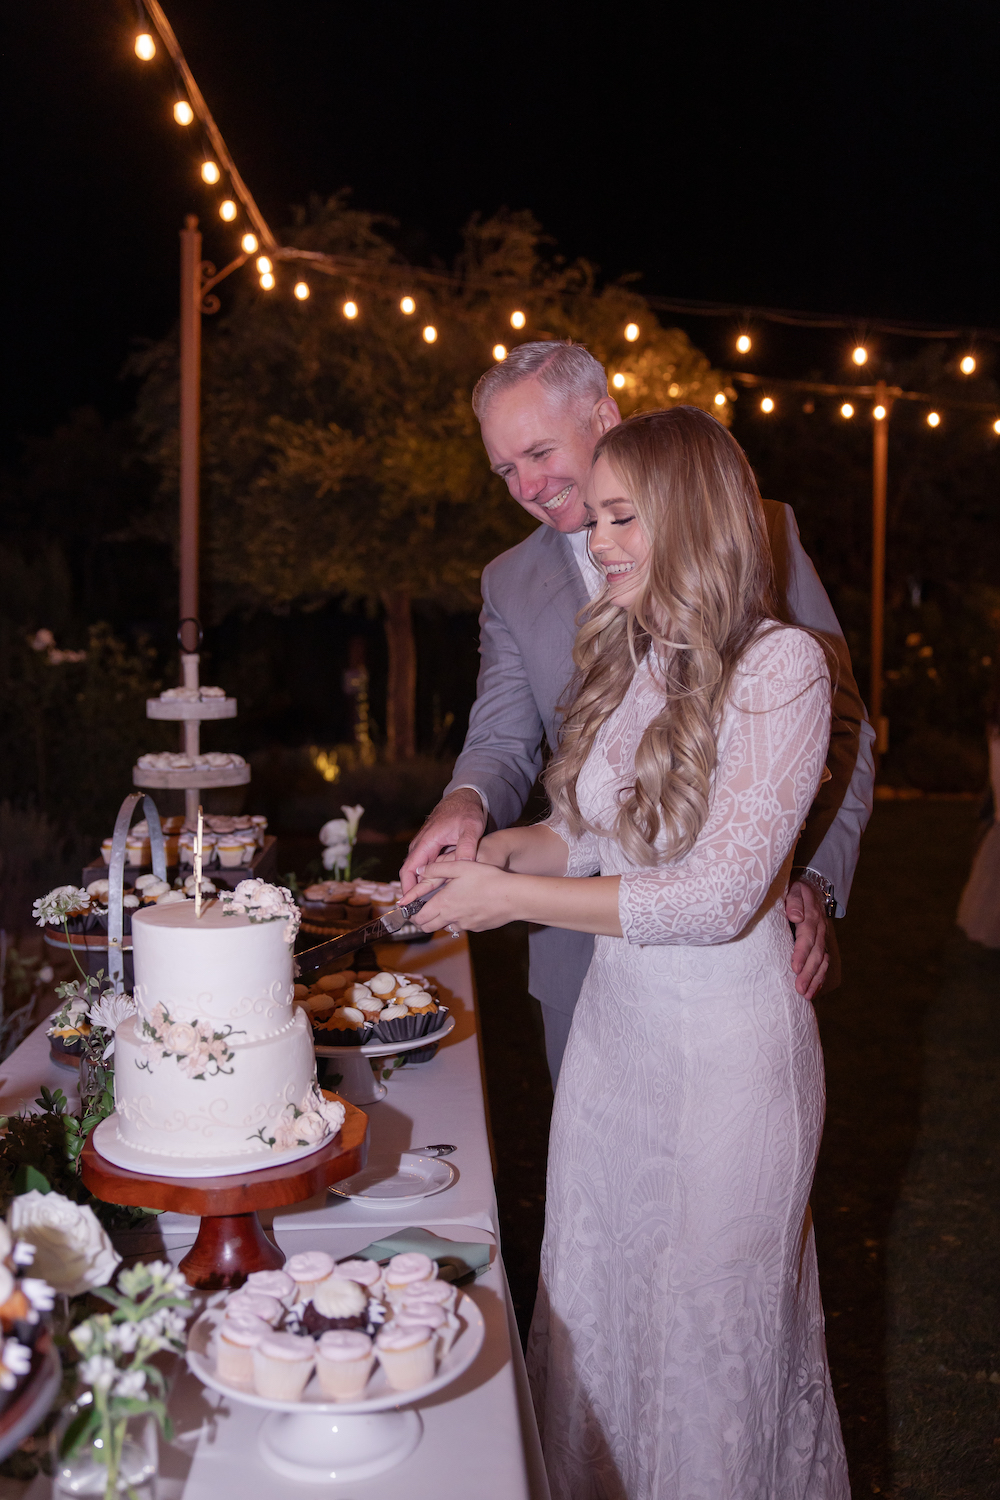 Tuscan Rose Ranch wedding bride and groom cake cutting.